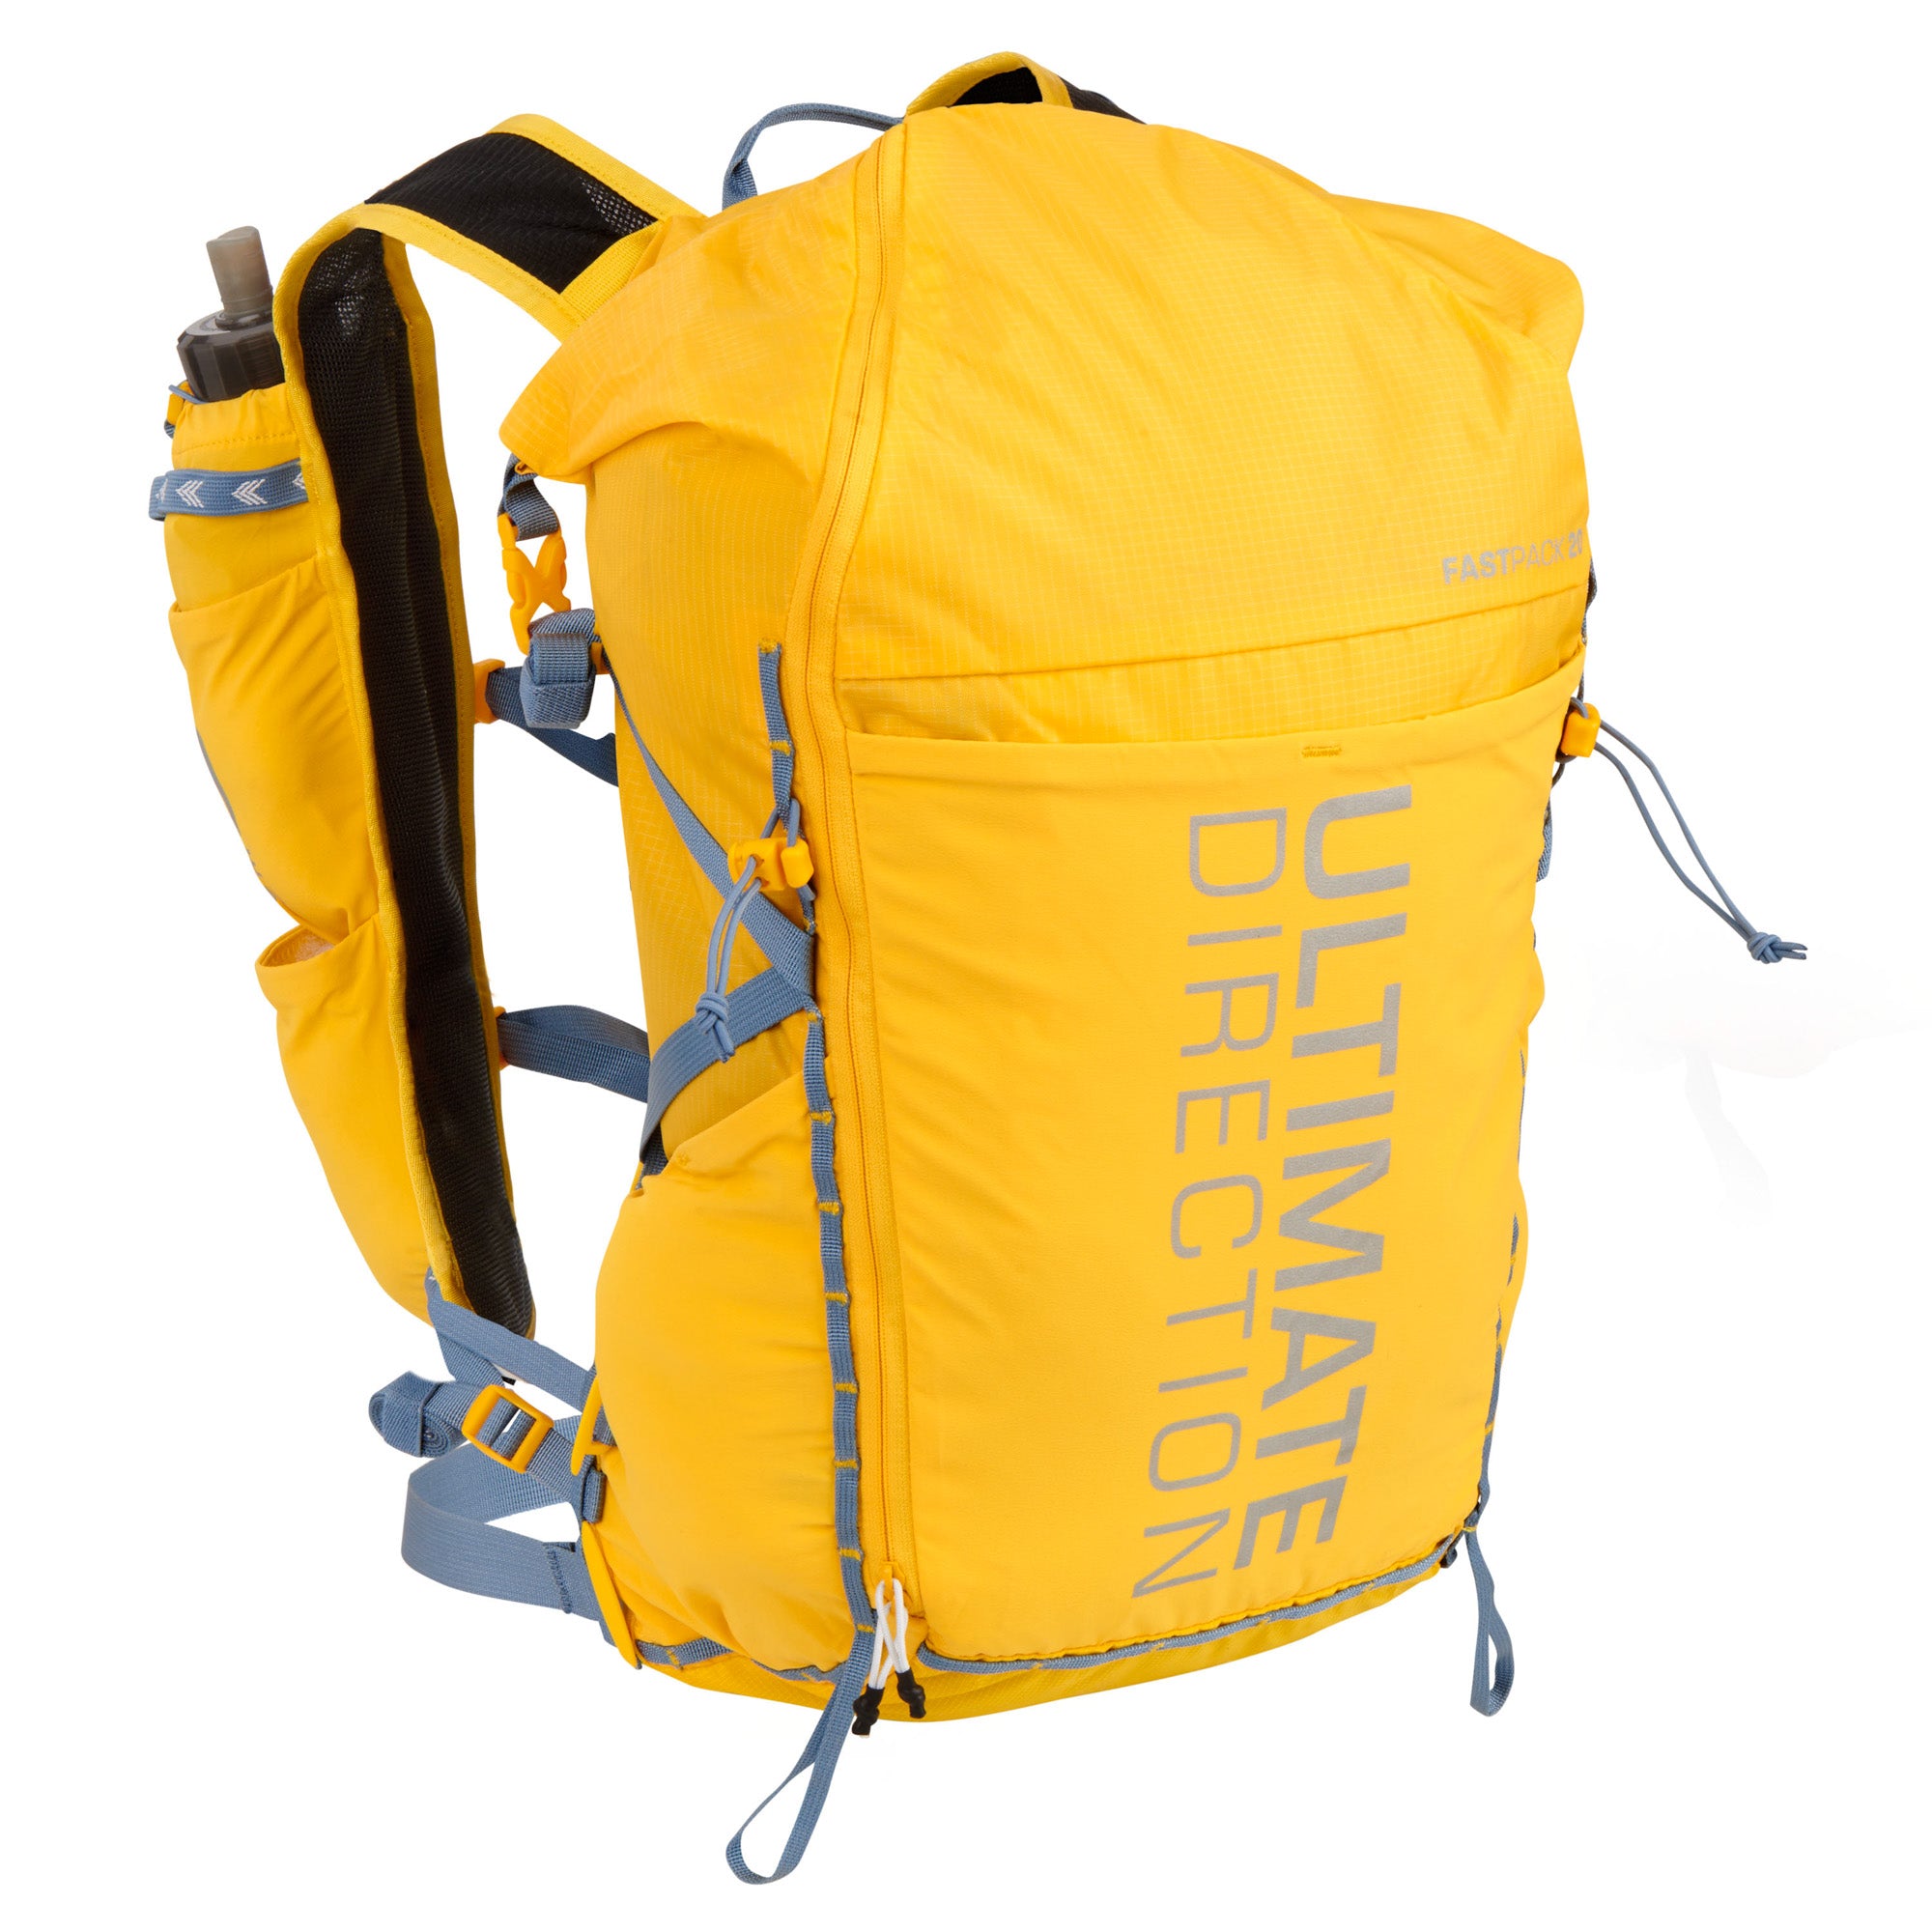 UD FASTPACK 20 BEACON